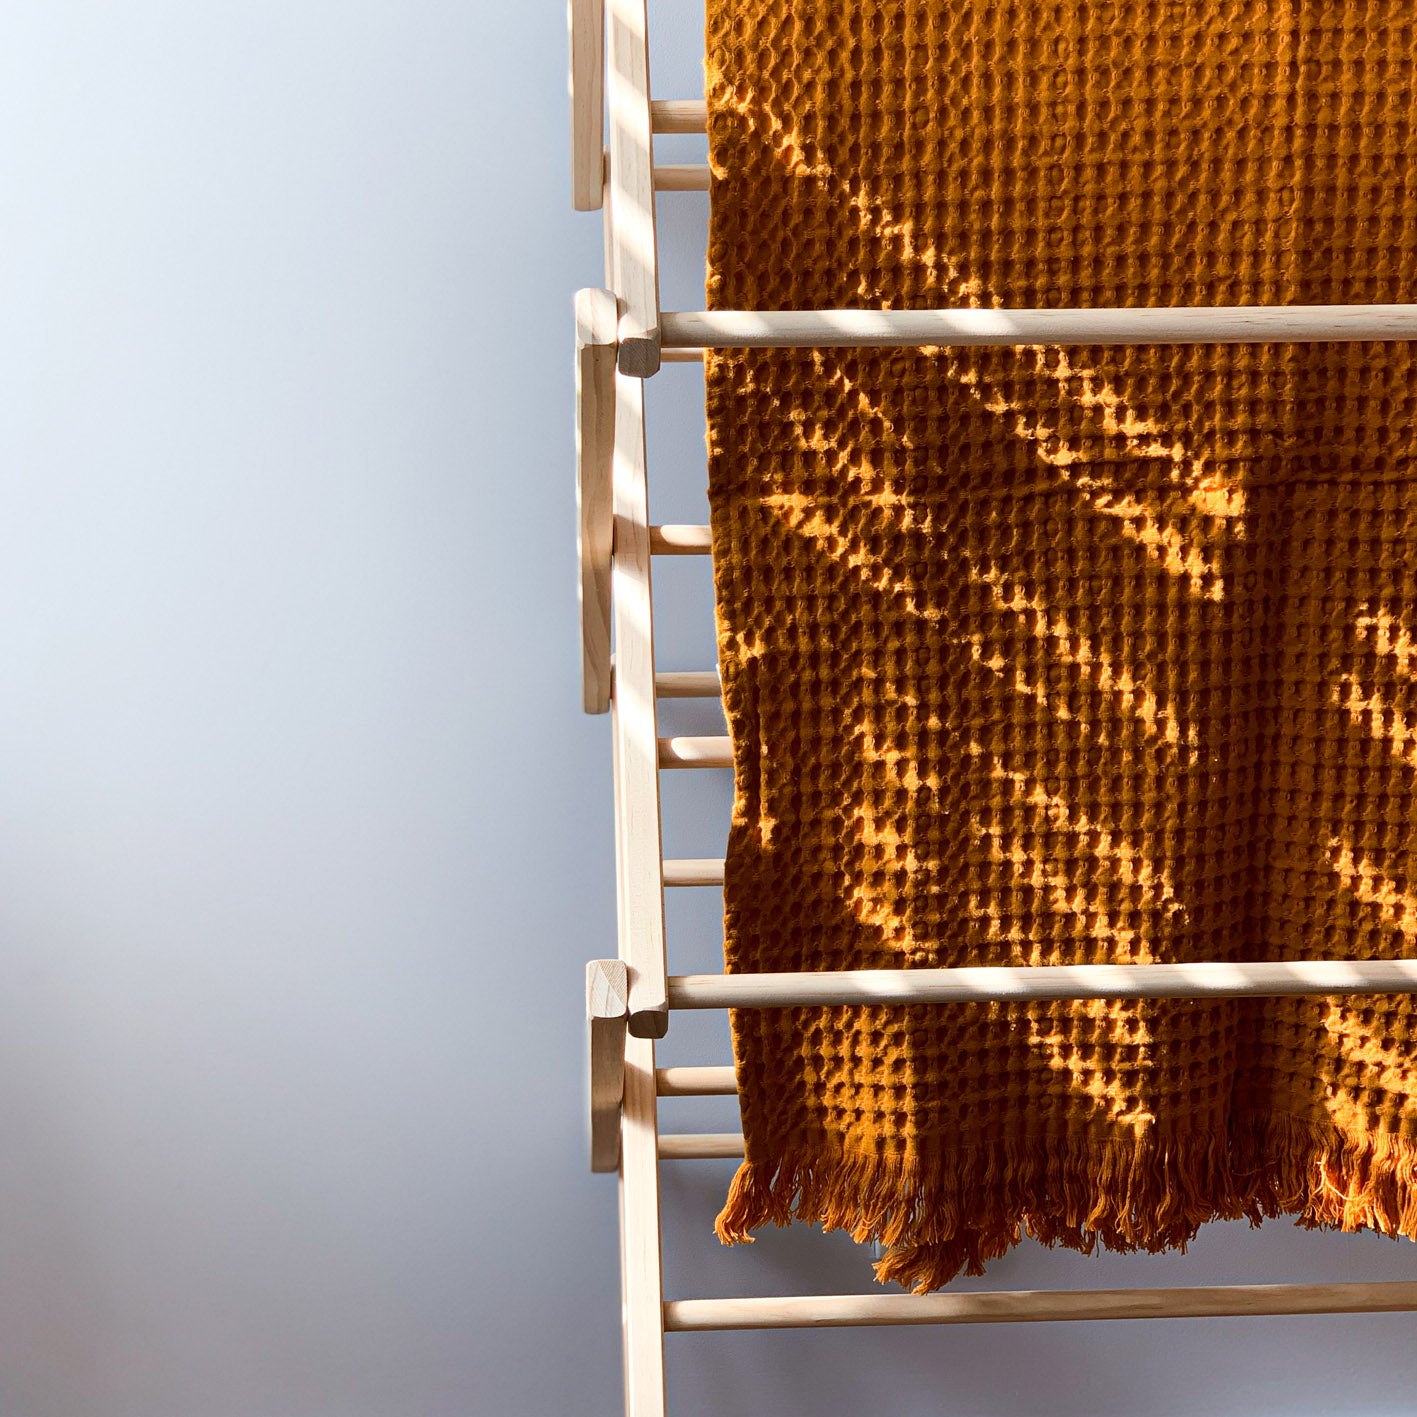 Ethically Made Wooden Clothes Airer Made in New Zealand